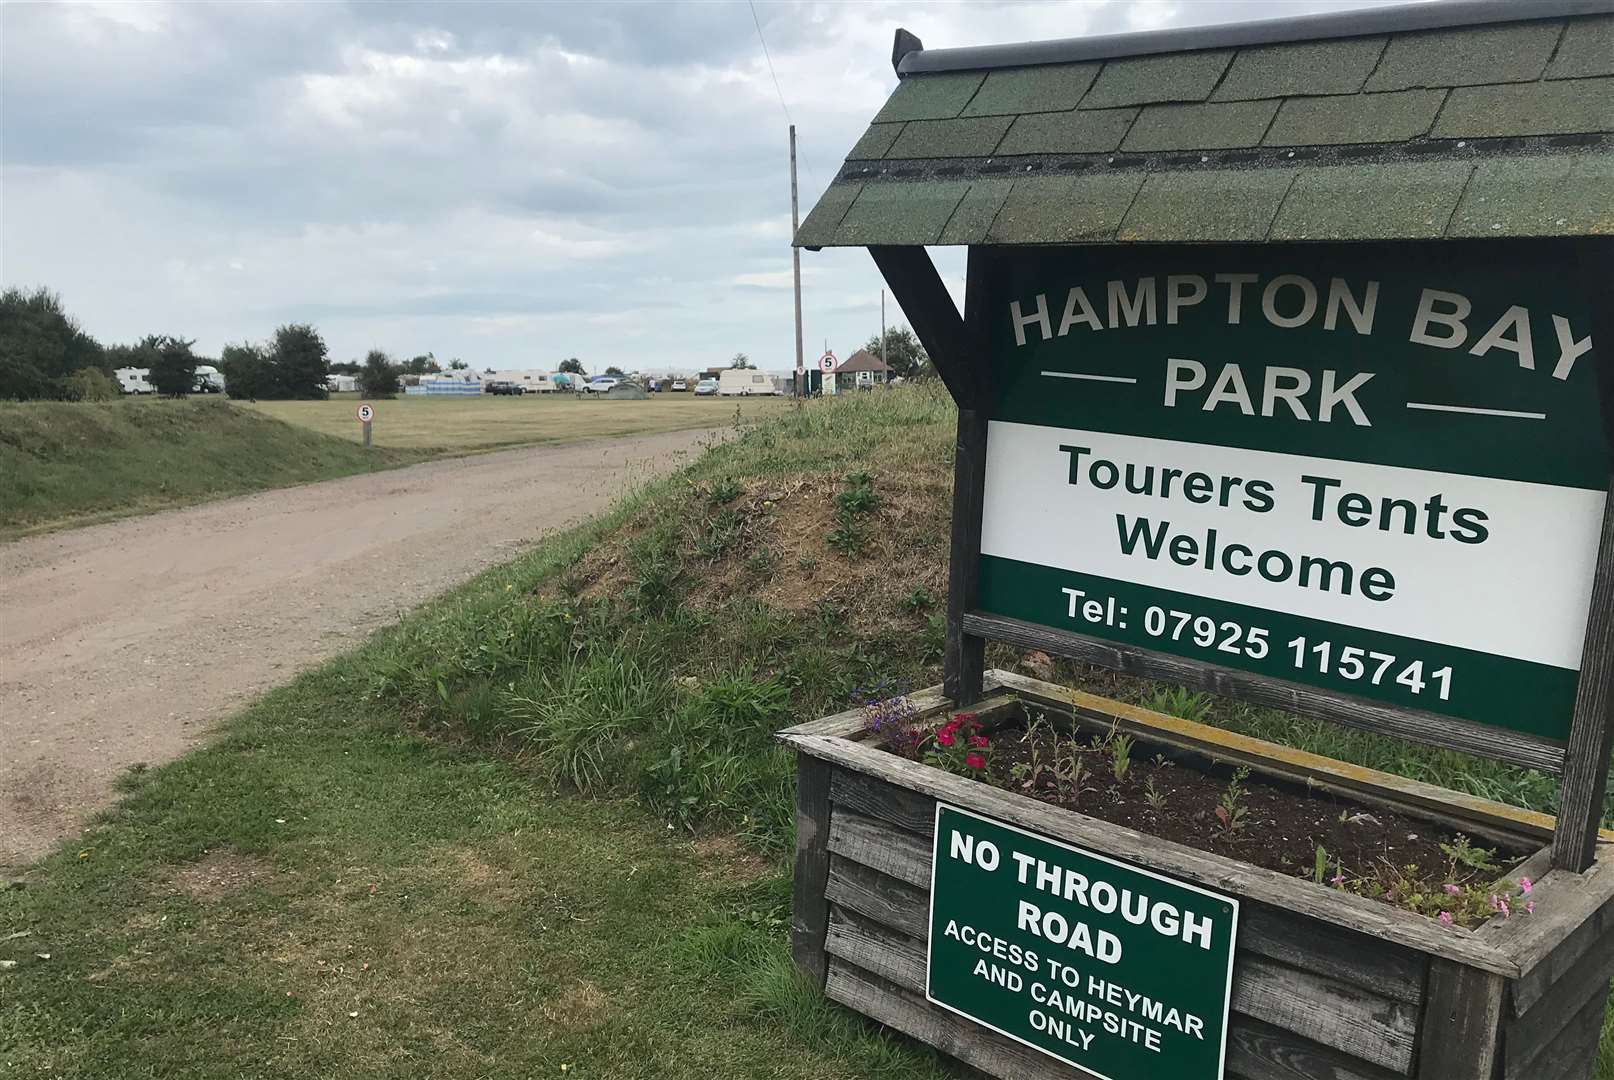 Plans are in to expand Hampton Bay Park